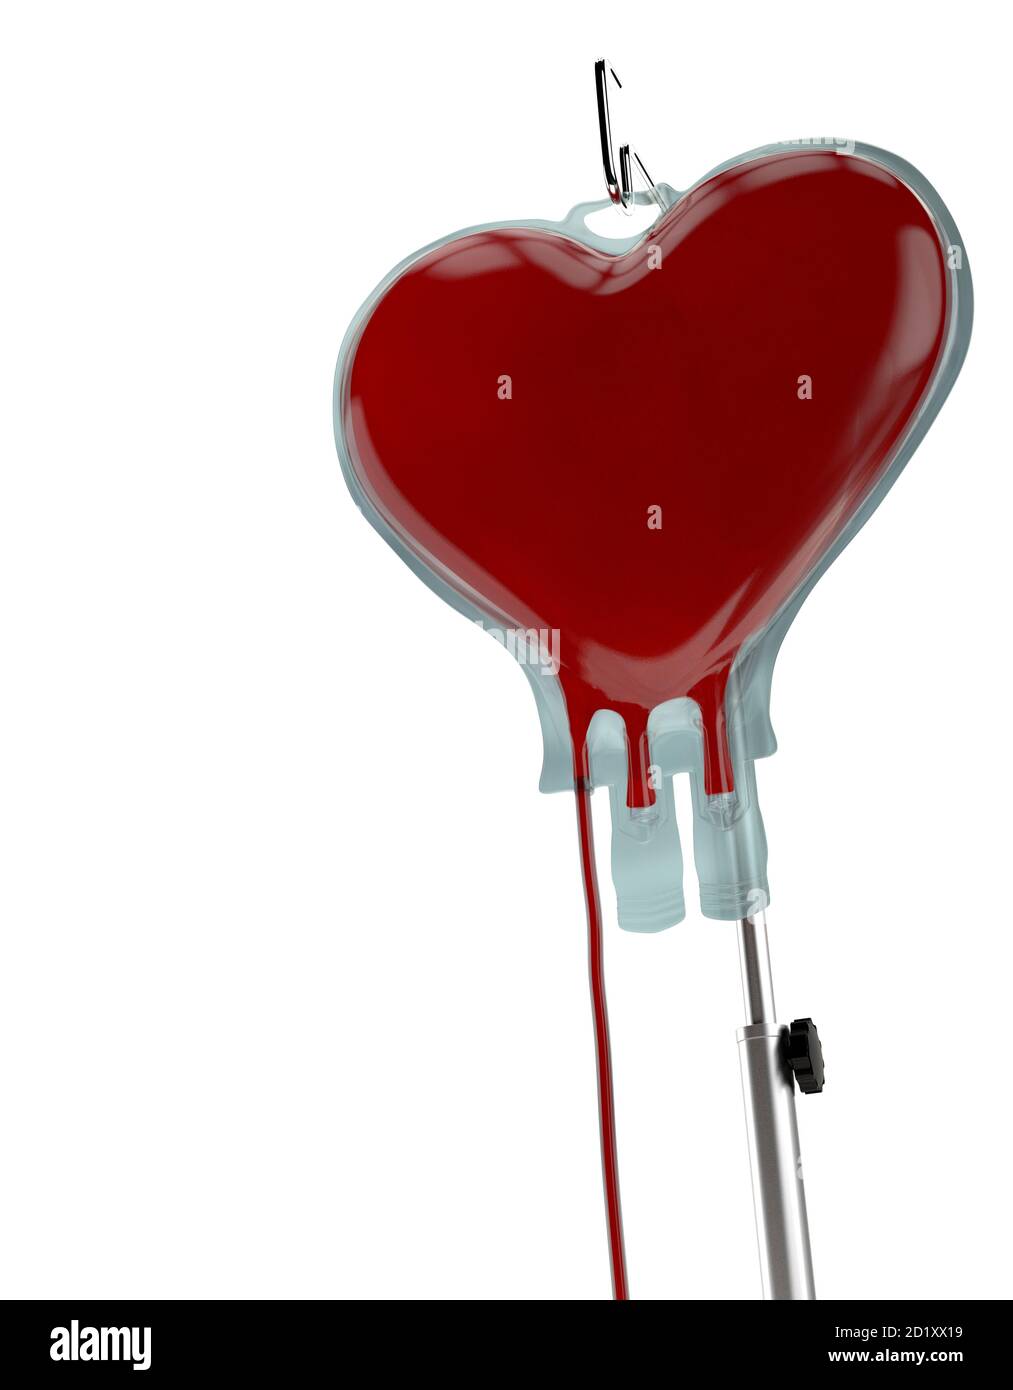 Blood Bag Heart Shape isolated on White Background. Blood Donation Concept Stock Photo